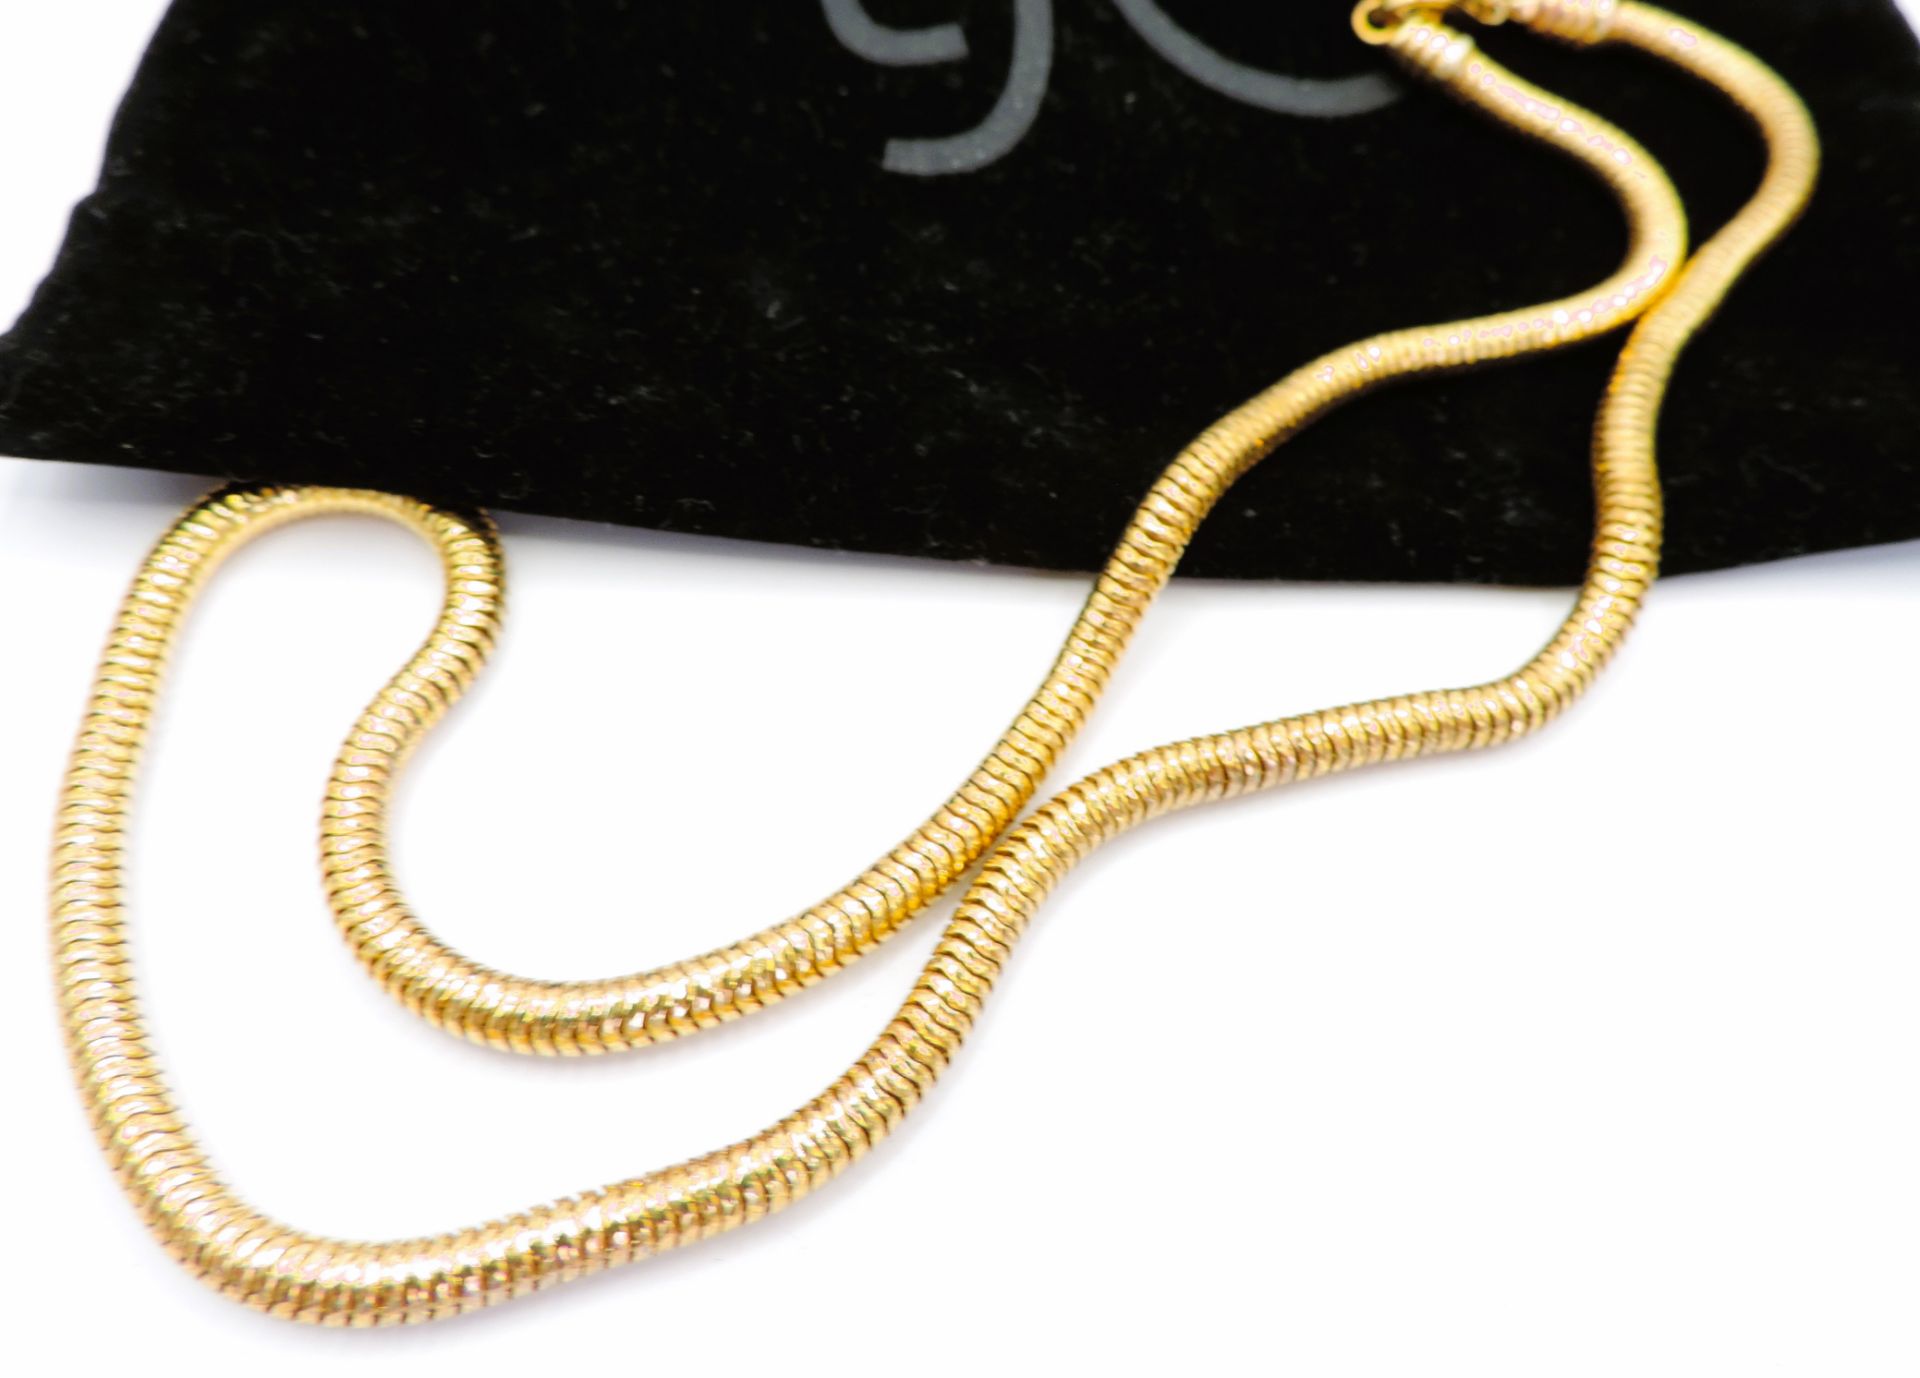 14K Gold on Sterling Silver Chain Necklace Made in Italy 23 grams New with Gift Pouch - Image 2 of 4